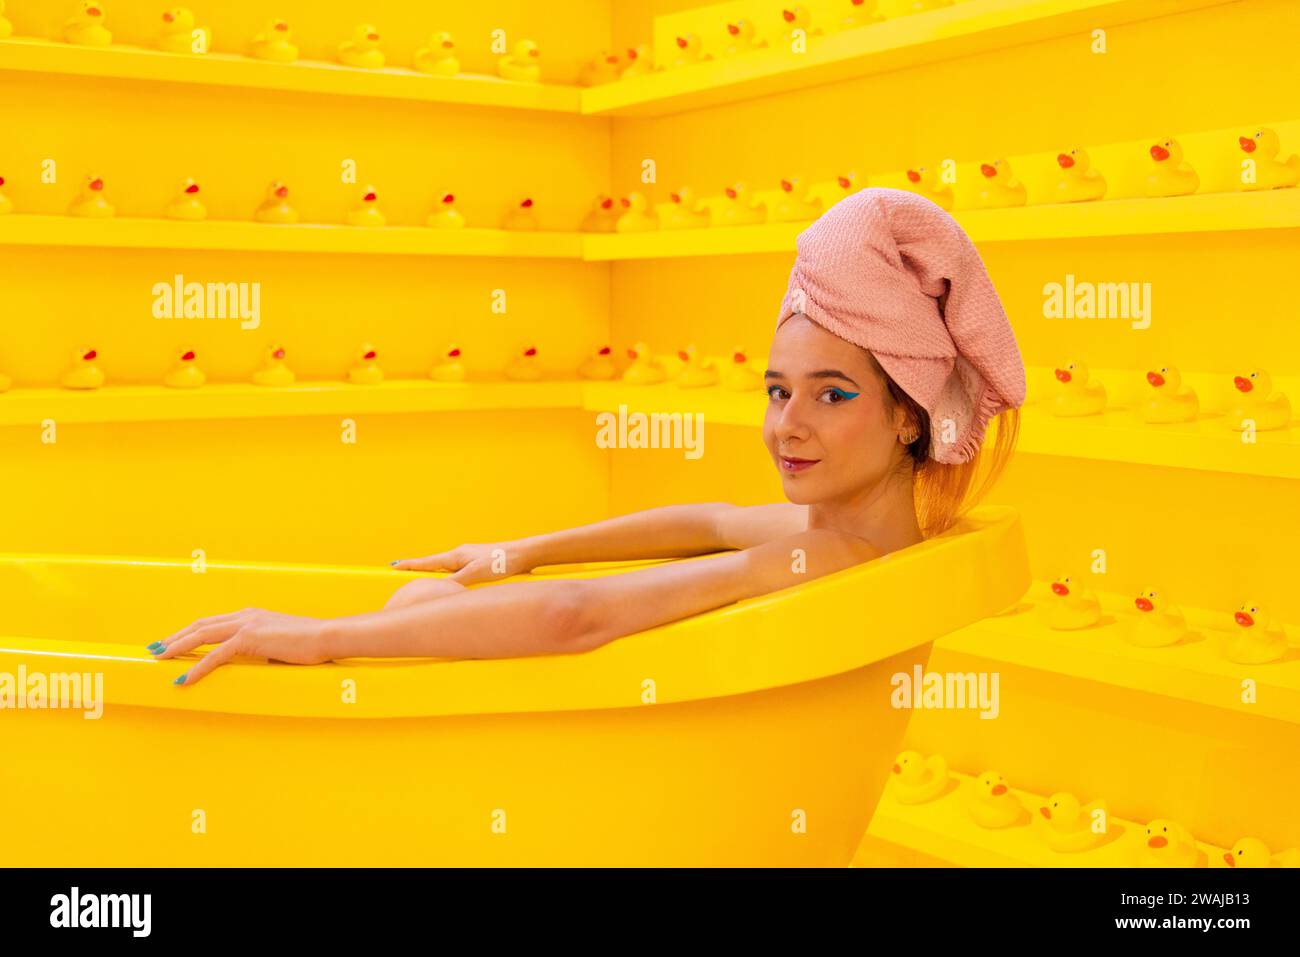 A woman with a towel wrapped head looking at camera relaxing in a bright yellow bathtub surrounded by rubber ducks in a monochromatic setting Stock Photo